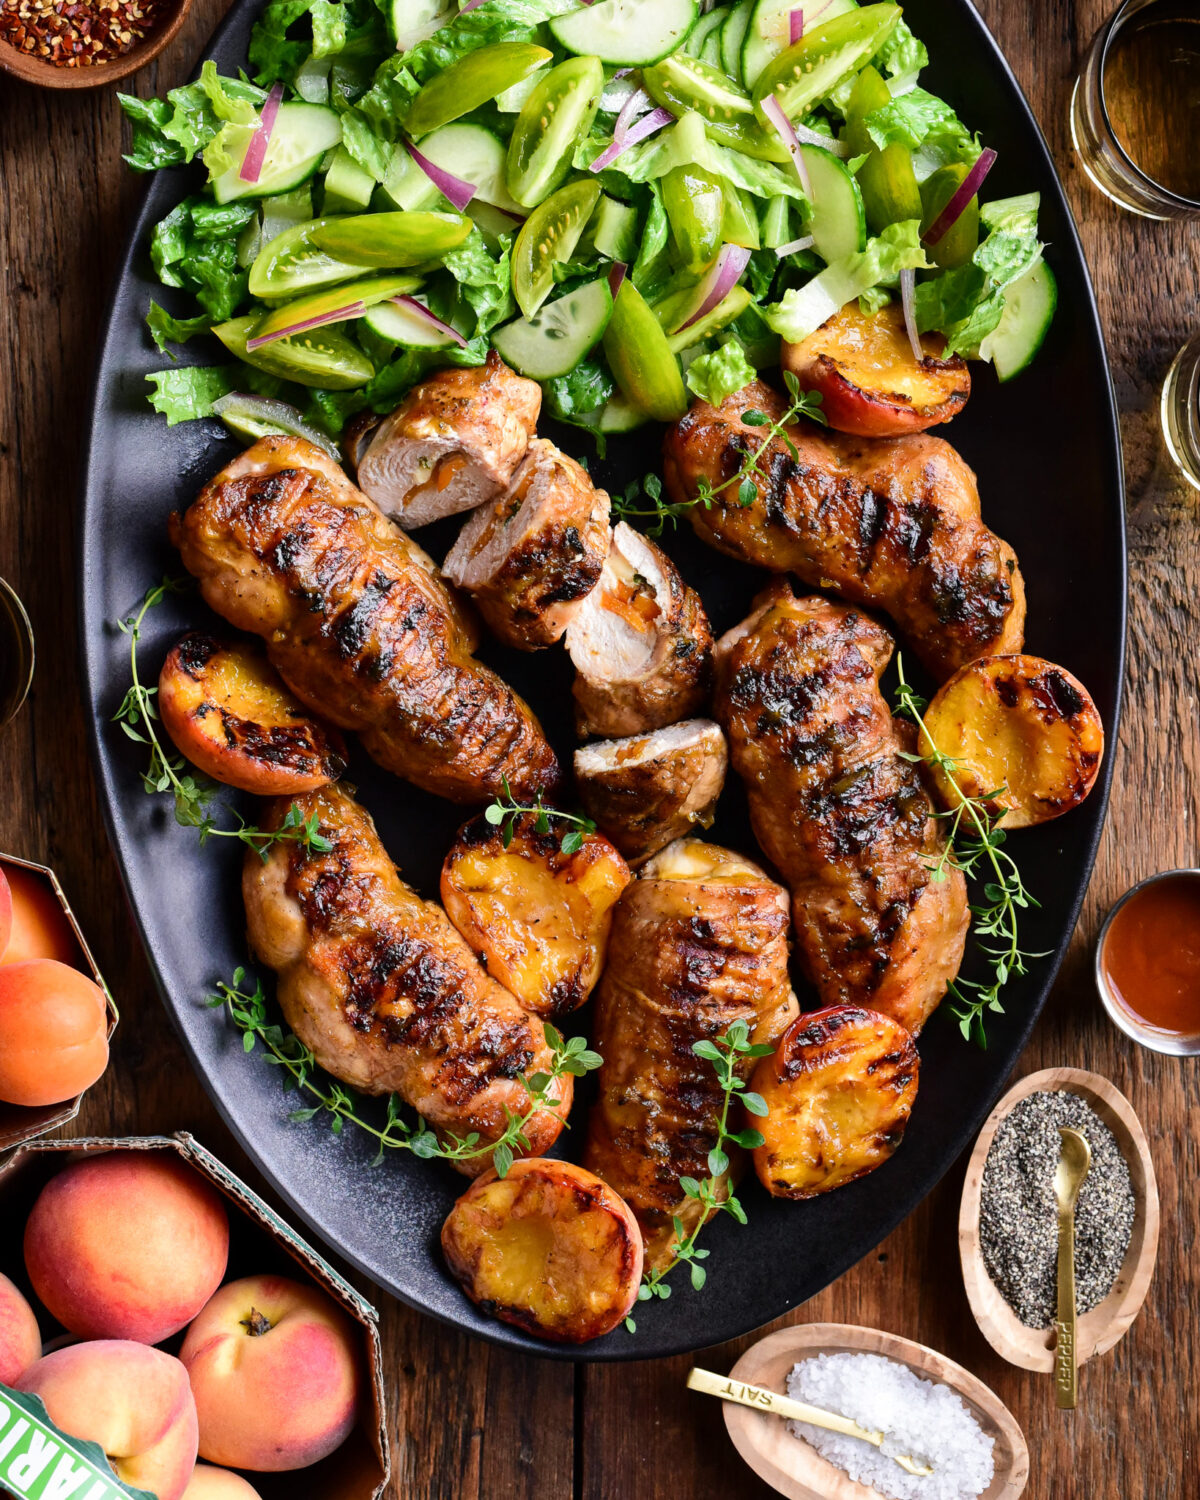 A larger platter of (Stuffed) Chicken Breasts with Peach BBQ Sauce and a green salad.